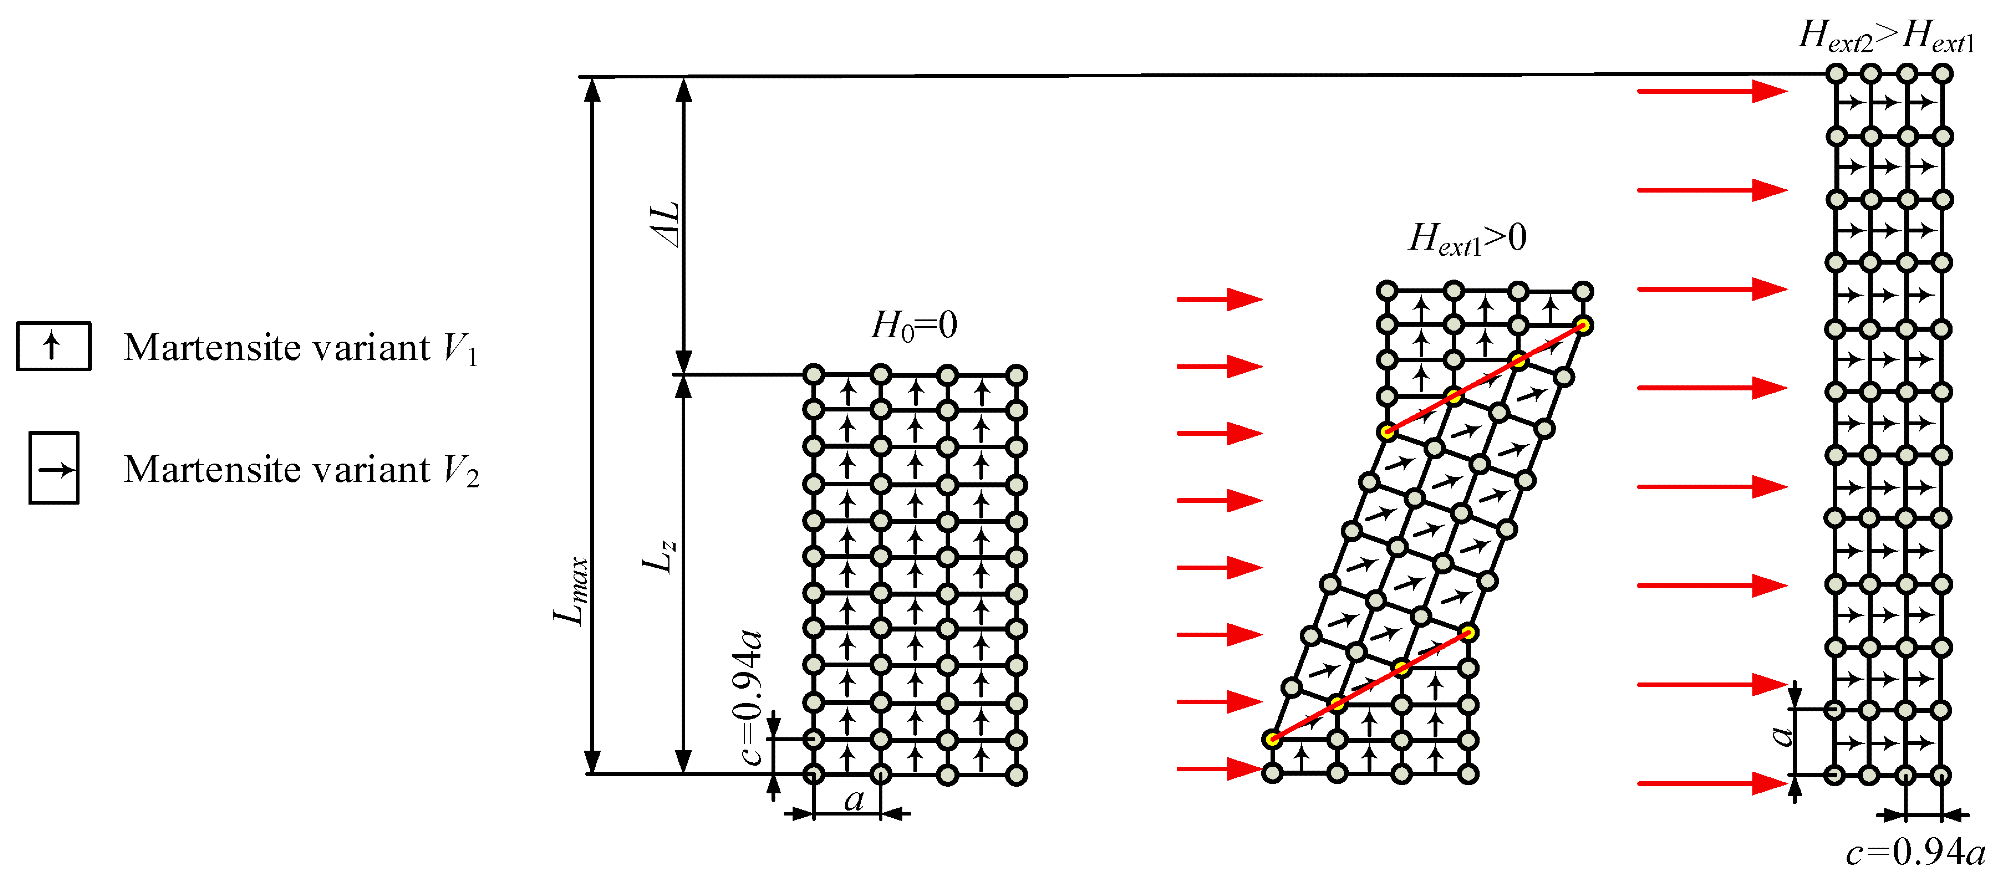 Deformation of a crystal lattice in a magnetic field, where a and c are the lengths of a single martensite cell (c = 0.94a).